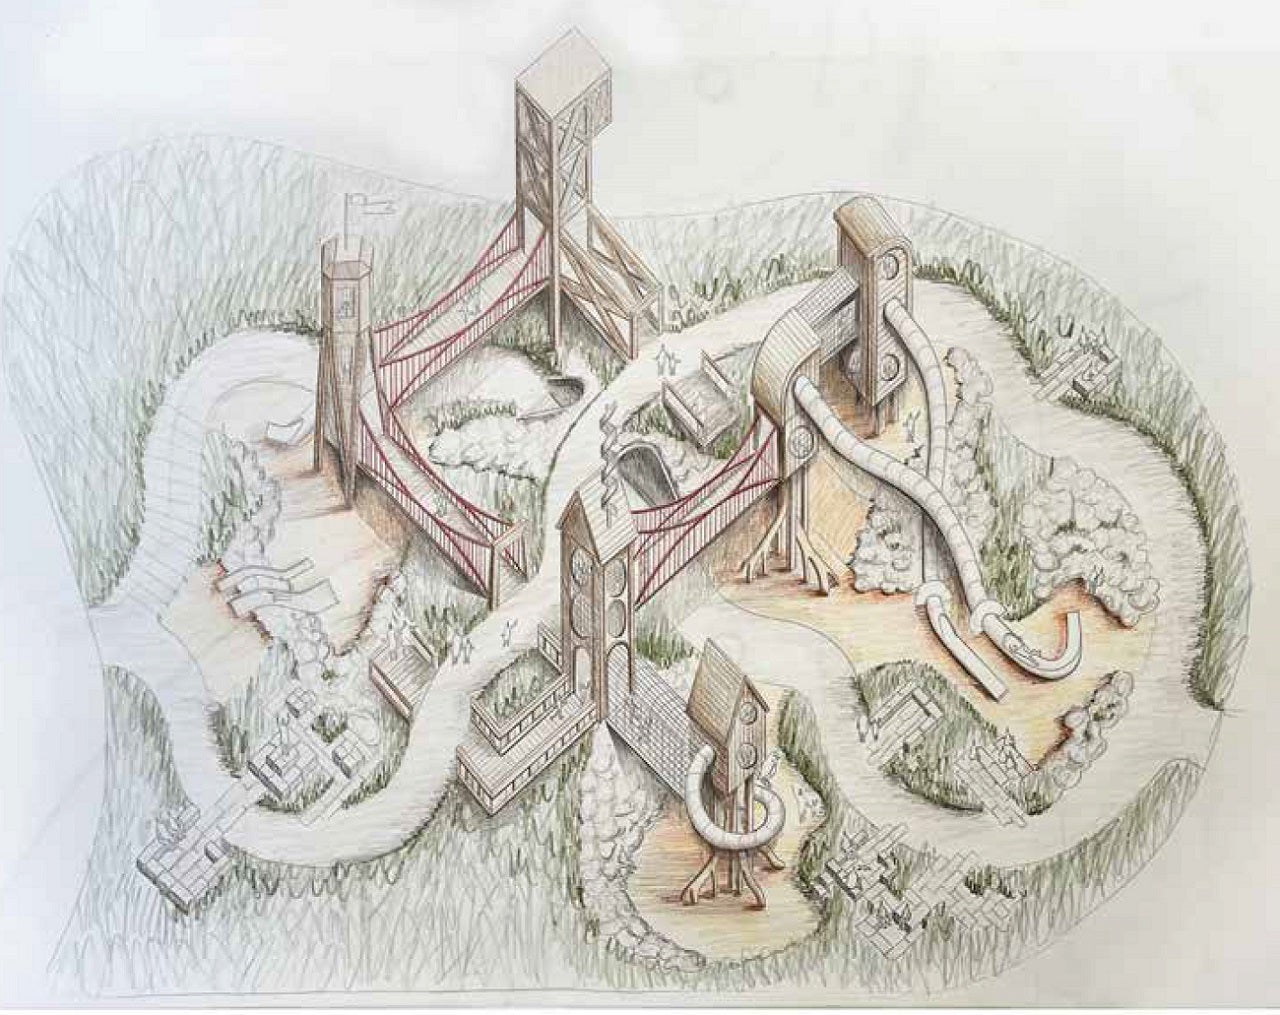 drawing showing a bird's eye view the elements of a park